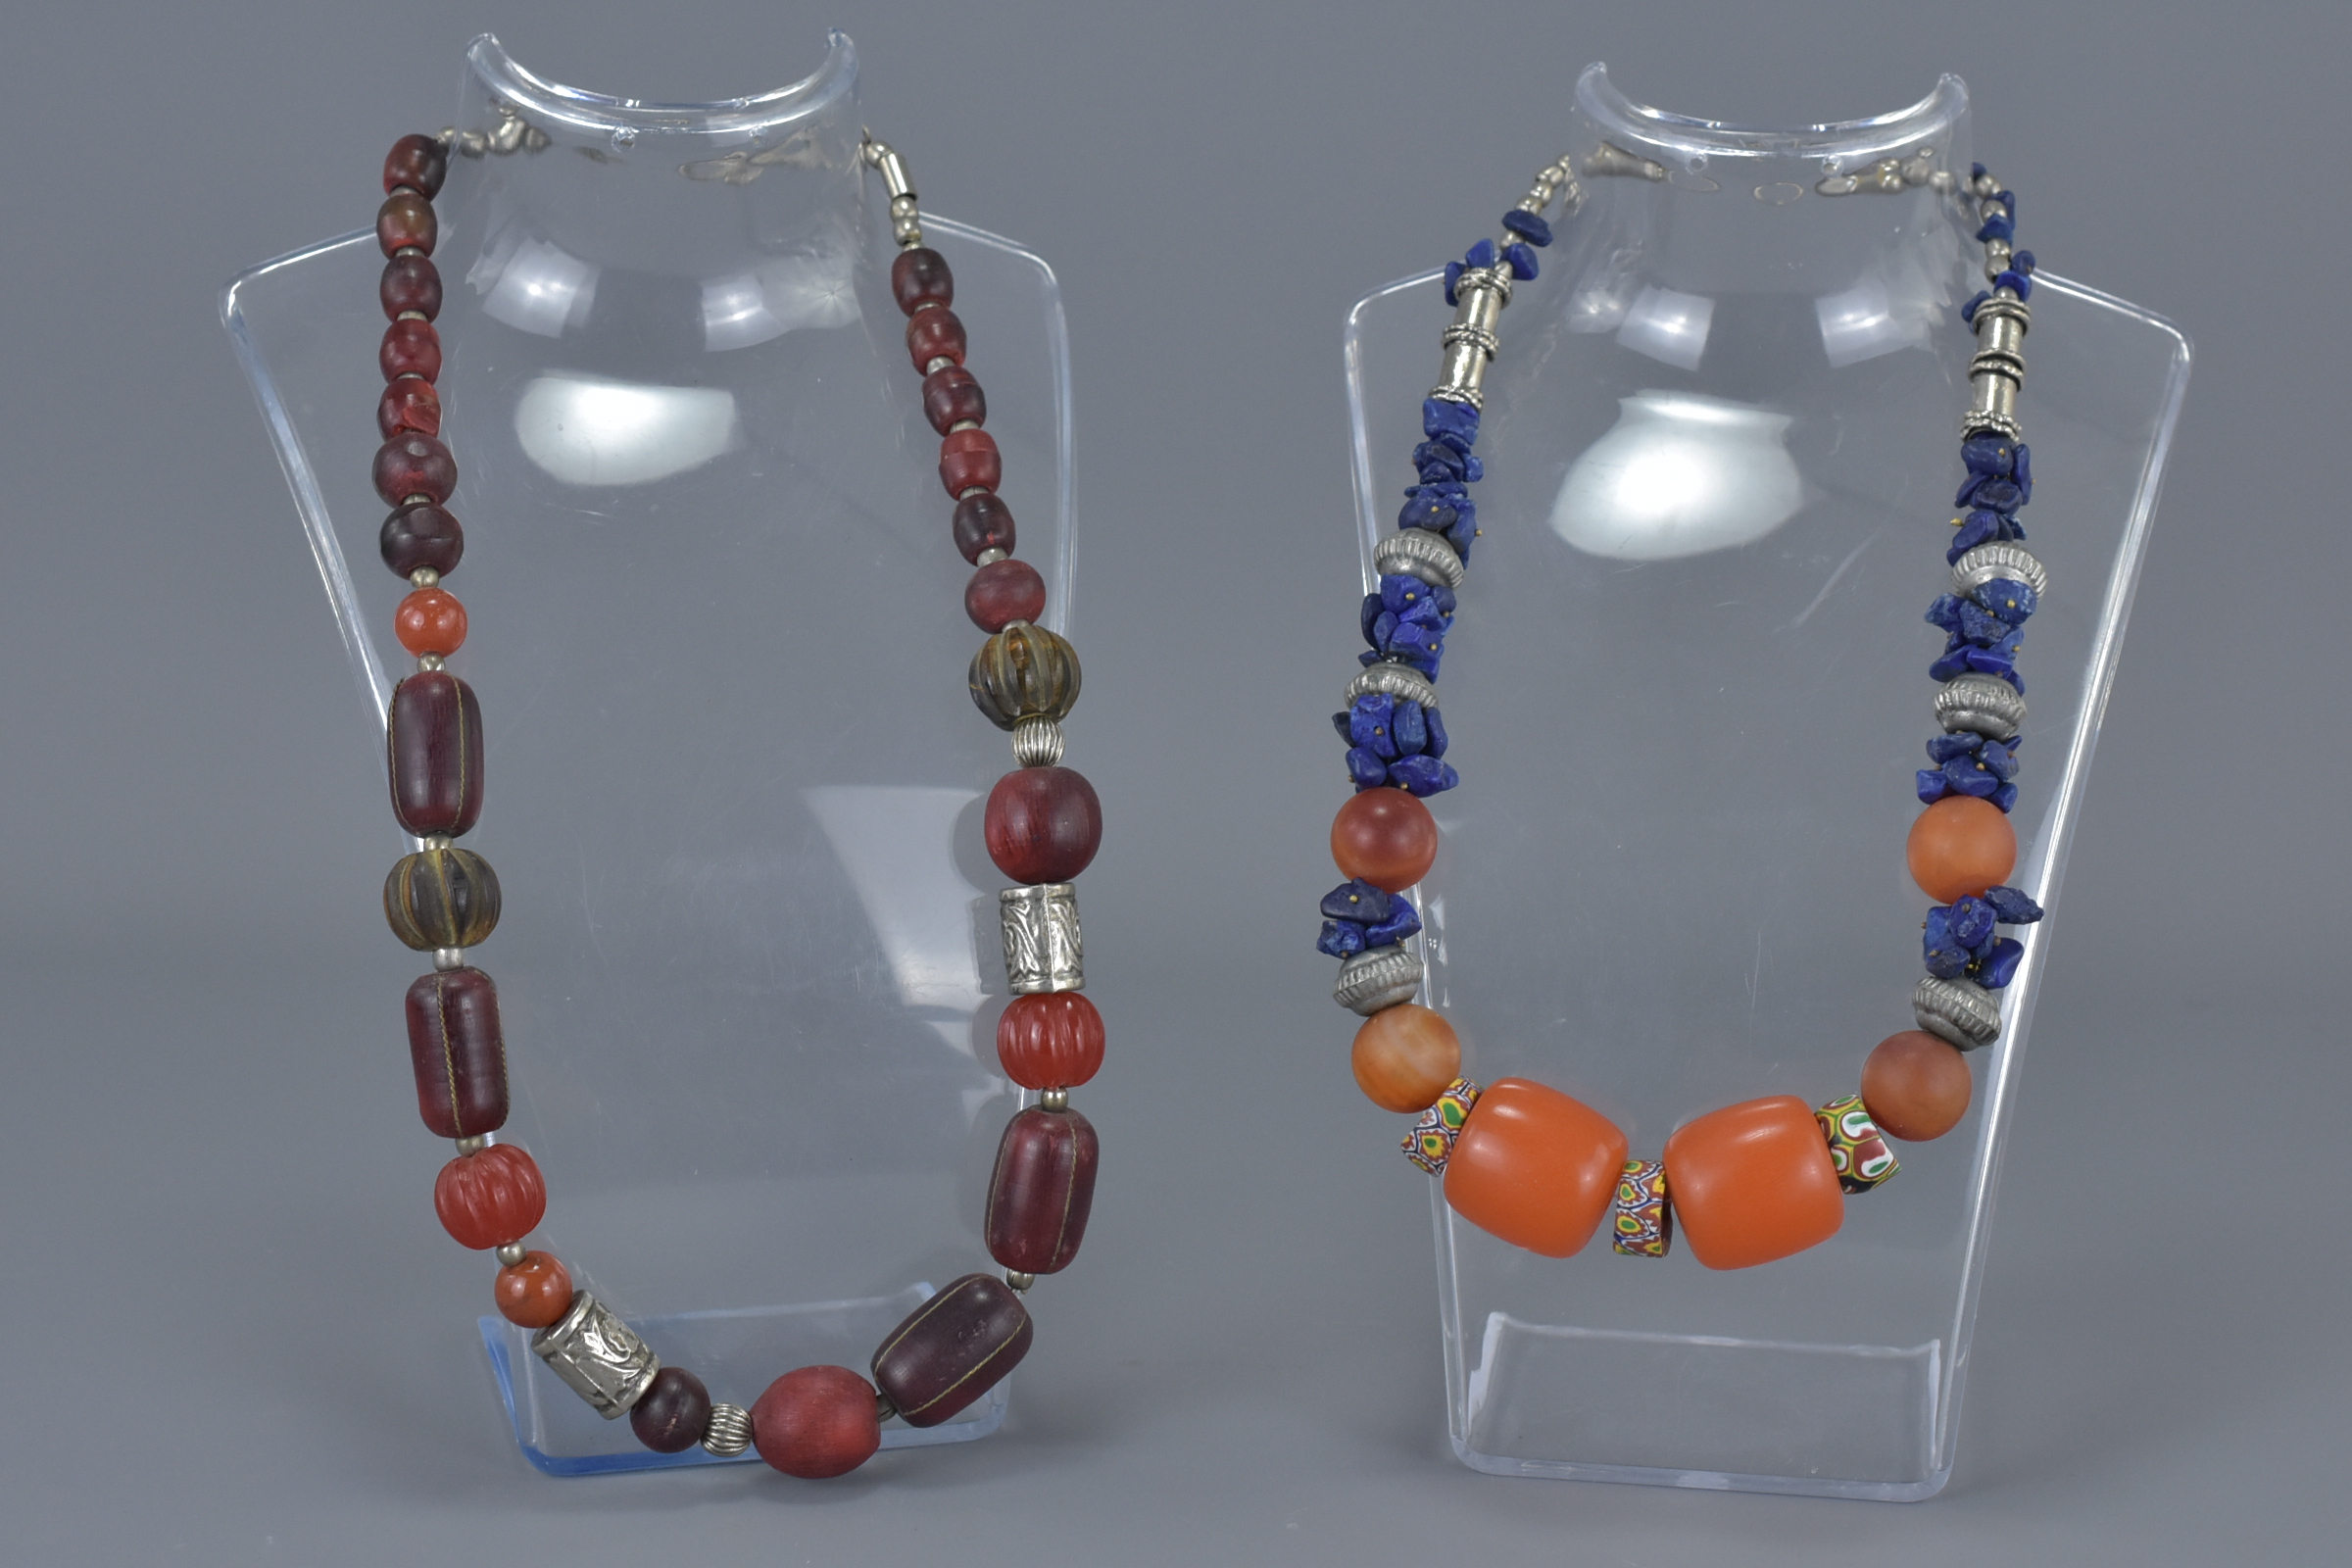 Two Ethnic Necklaces with wooden, resin, white metal and stone beads